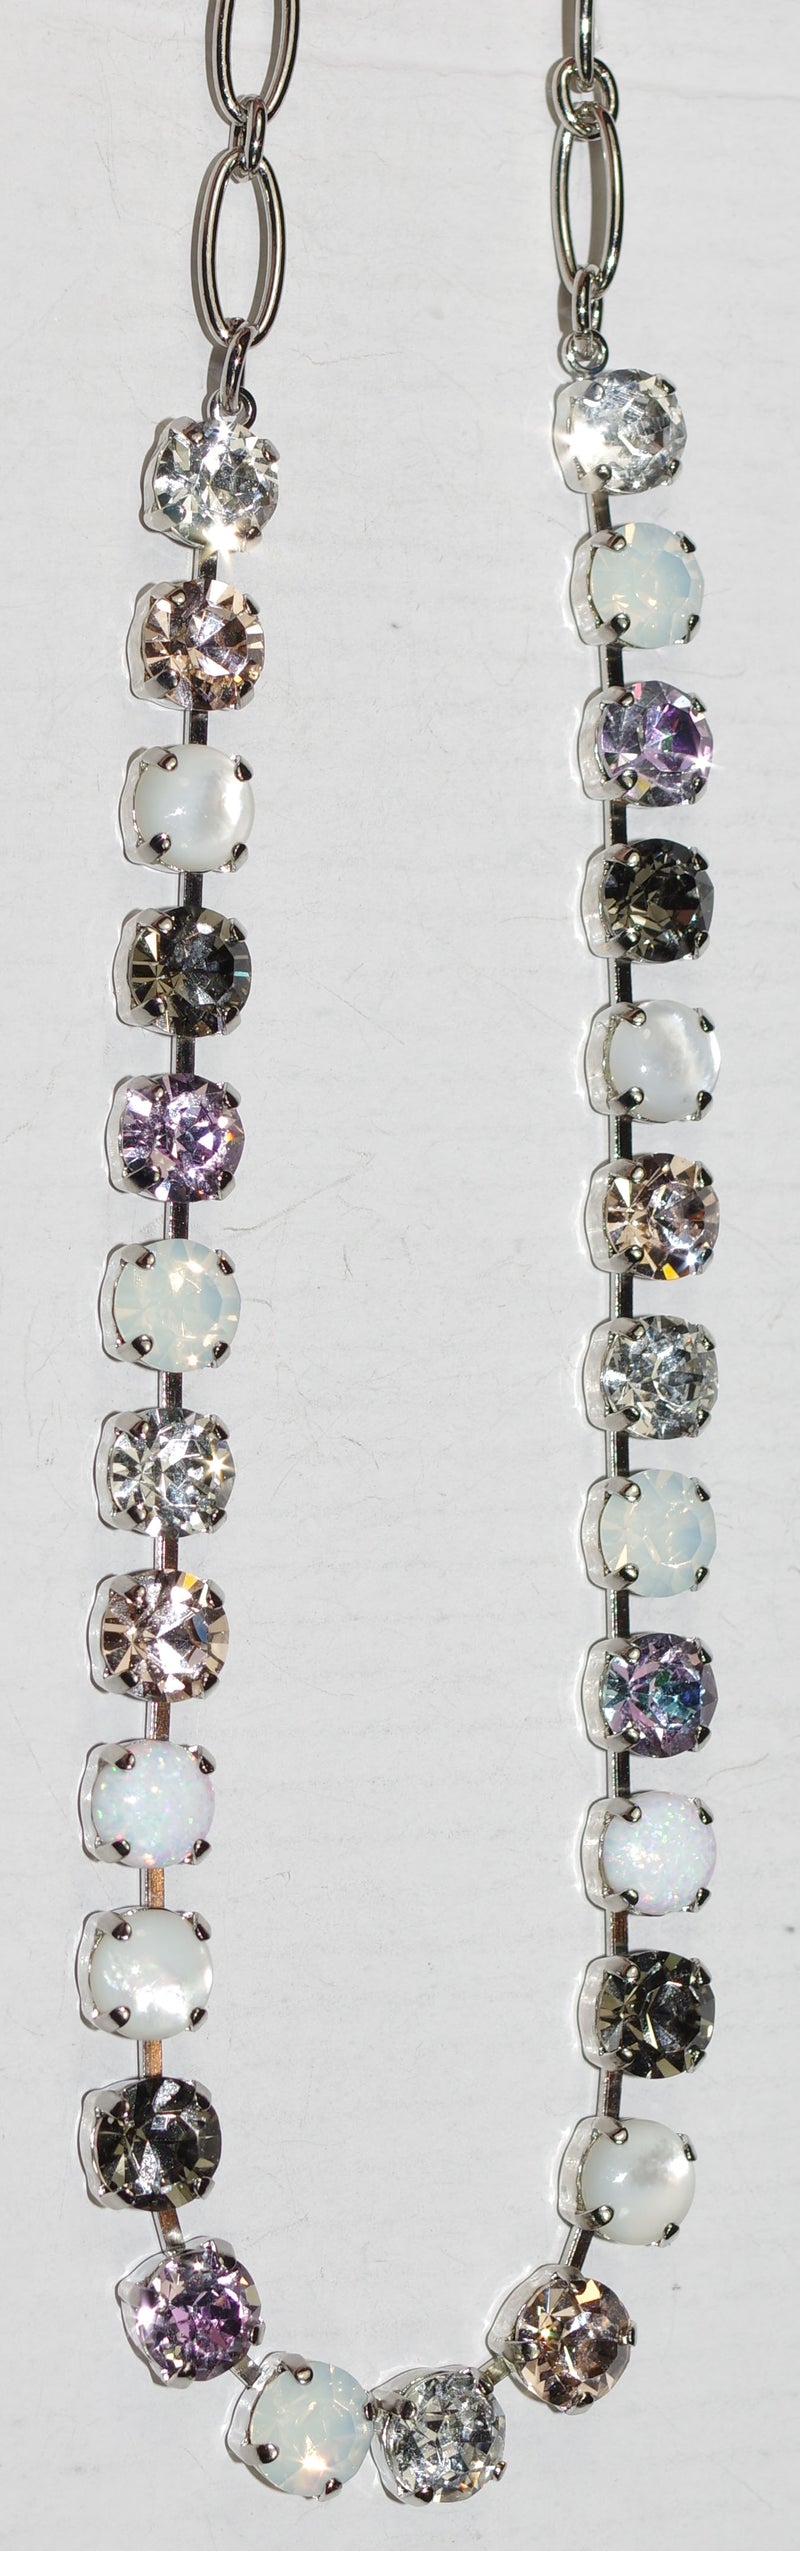 MARIANA NECKLACE BETTE ICE QUEEN: lavender, white, clear, grey 1/4" stones in silver rhodium setting, 17" adjustable chain